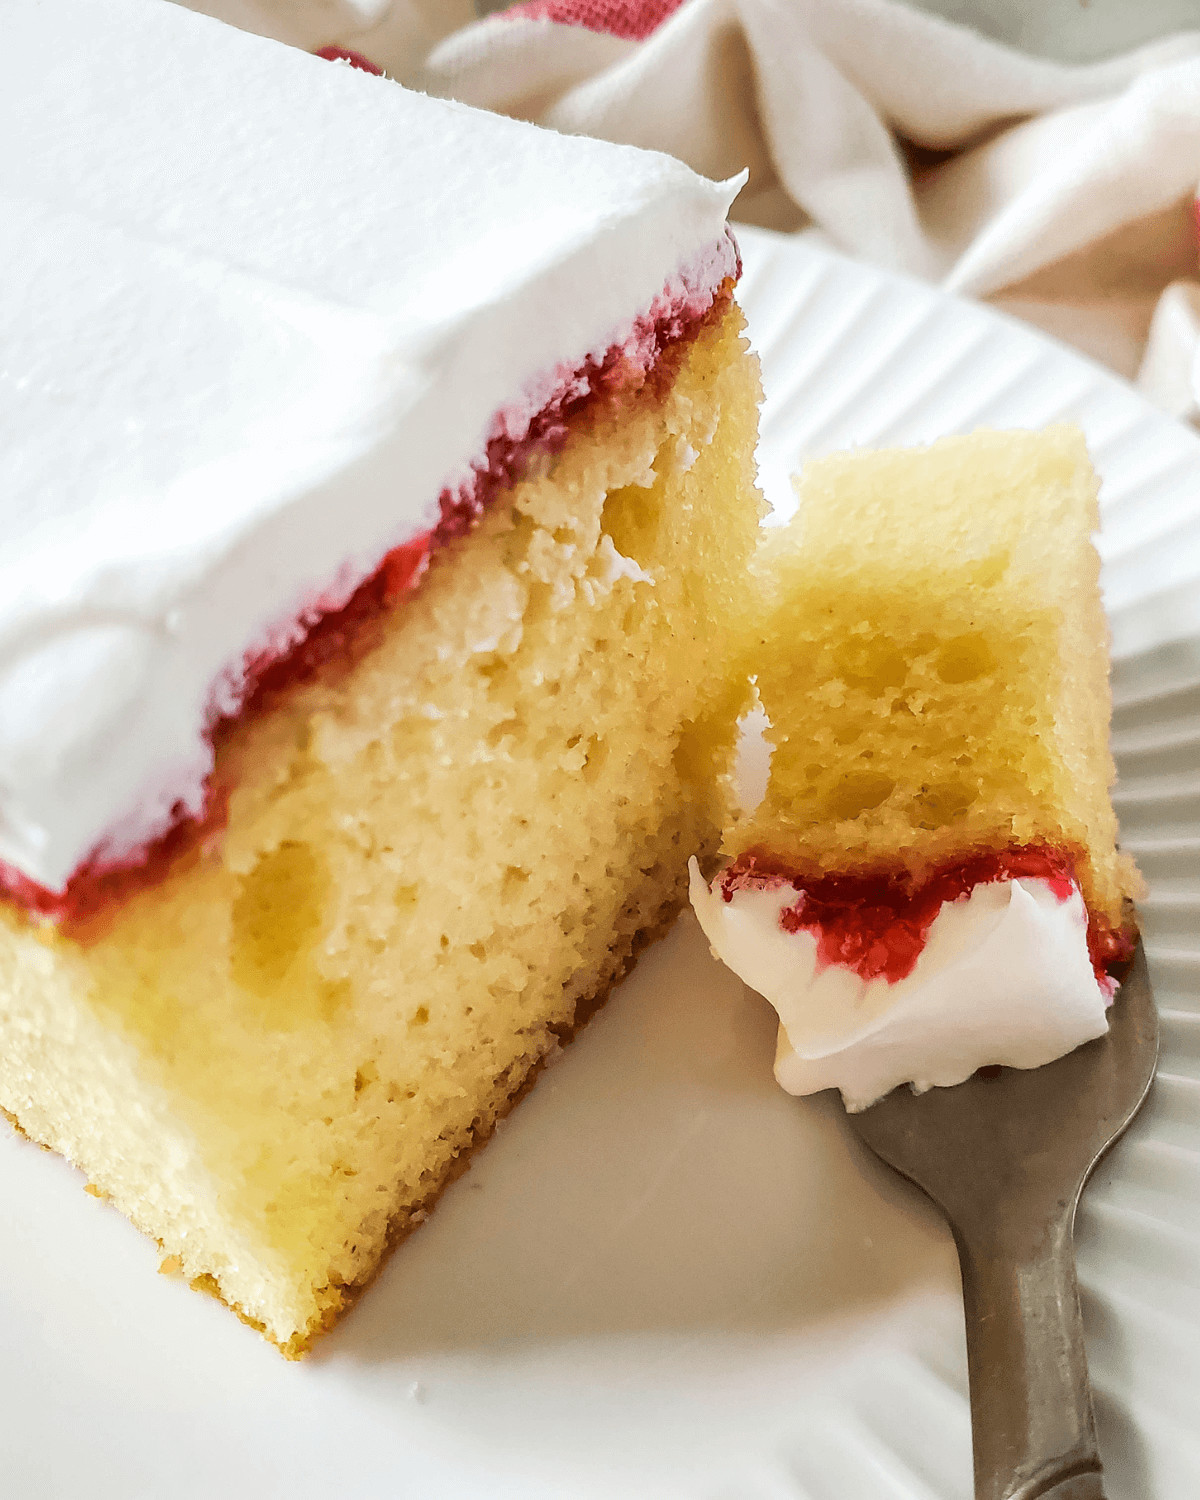 A slice of vanilla raspberry cake on a plate with a fork.